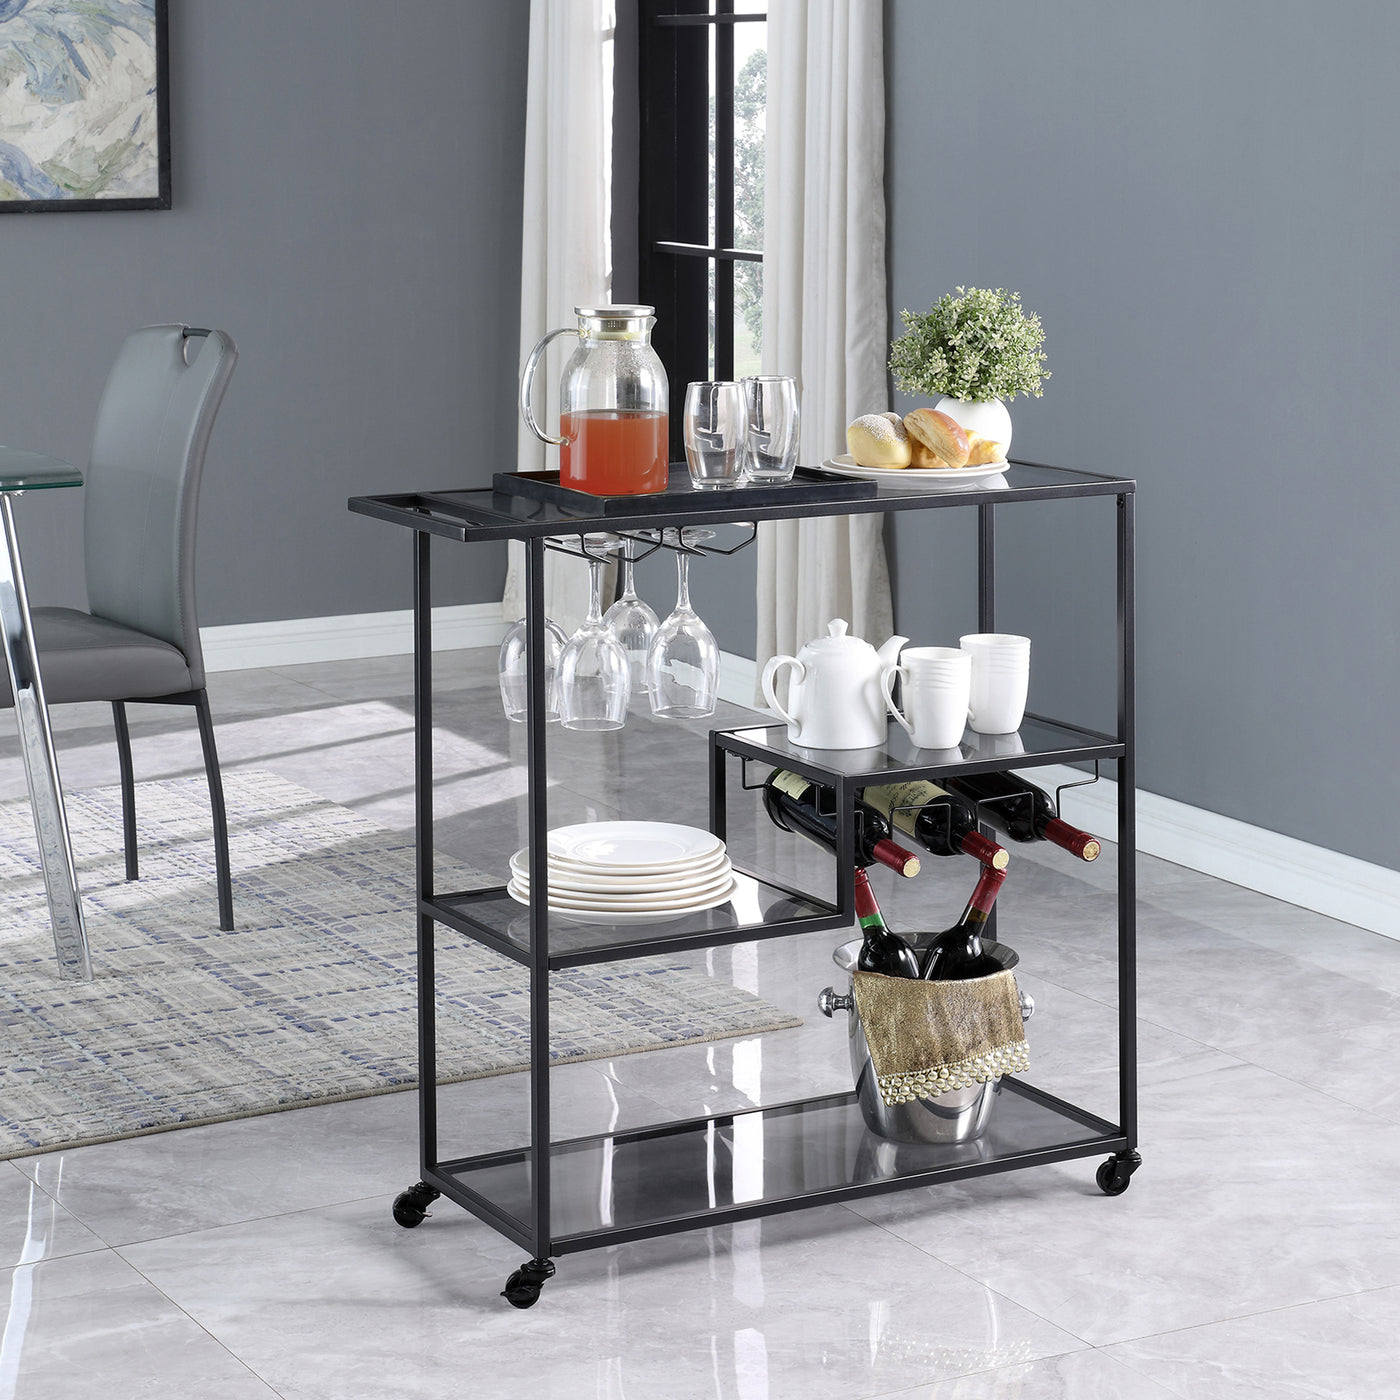 FirsTime & Co. Black Evelyn Bar Cart, Modern Style, Made of Metal